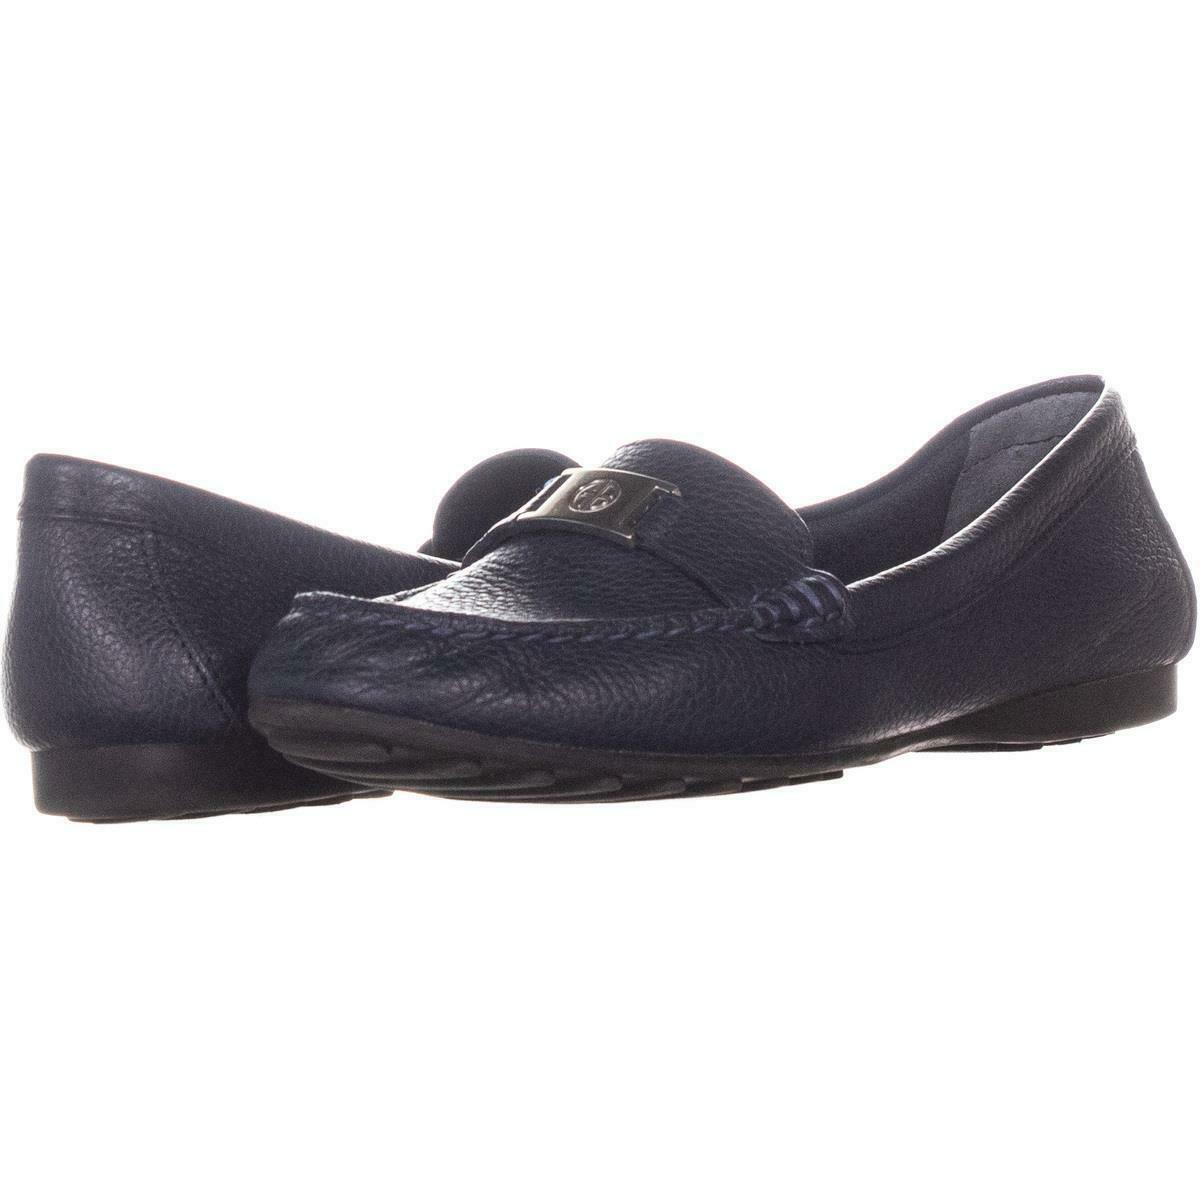 GB35 Dailyn Classic Loafers 765, Deep Midnight, 7 US - Flats & Oxfords